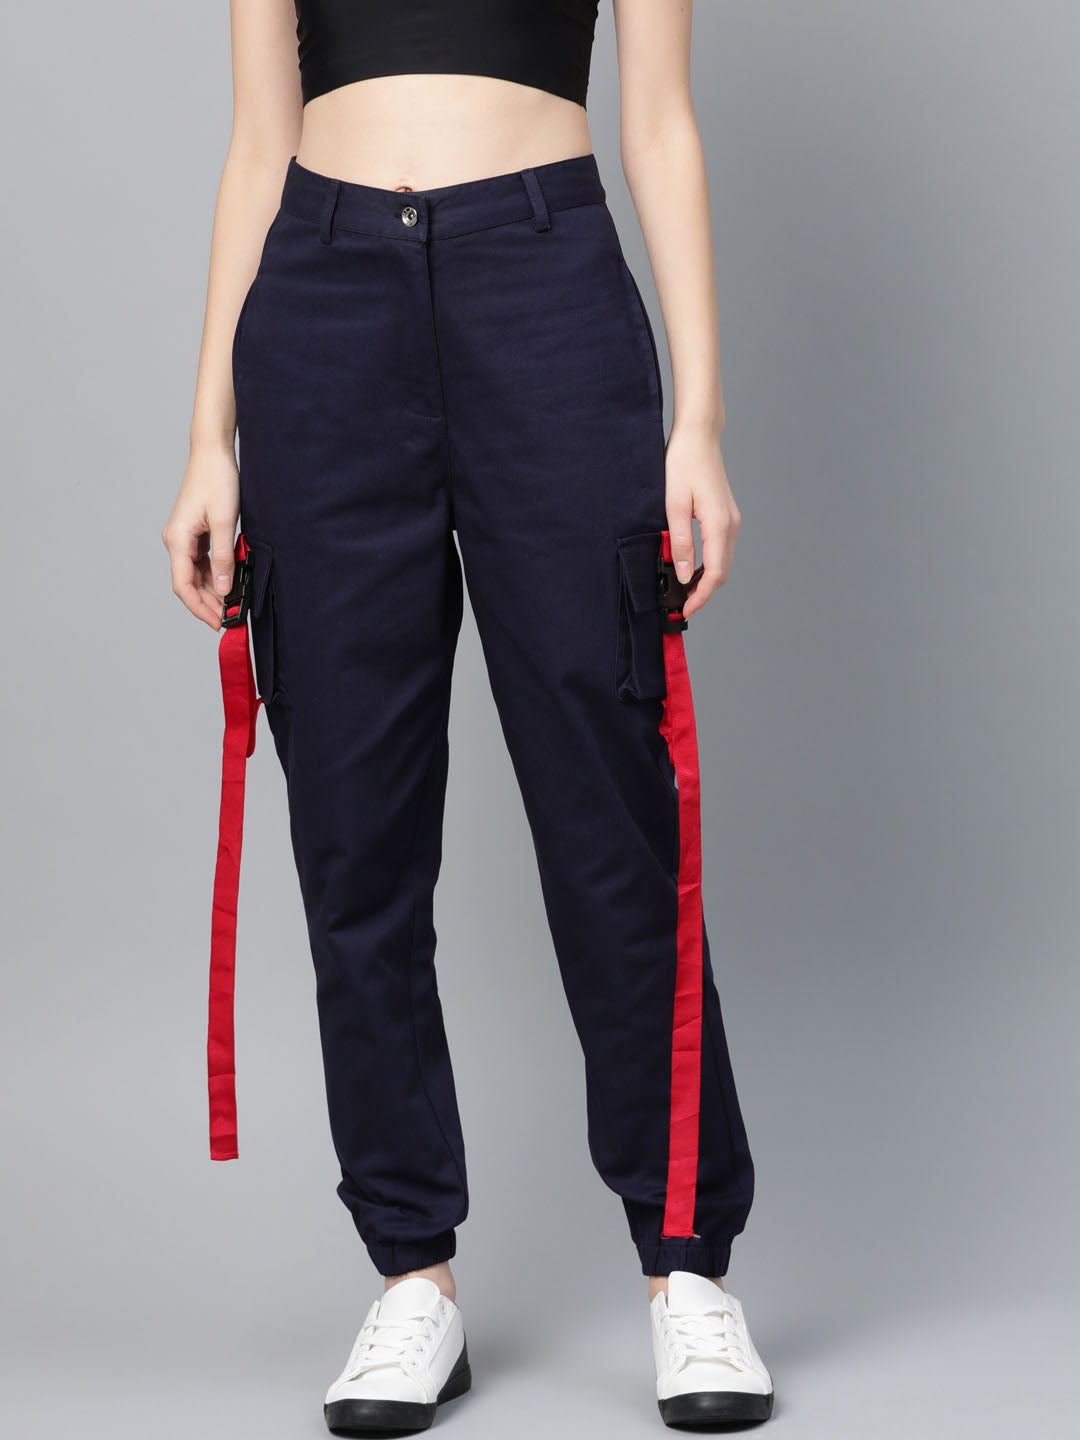 Buy RED Trousers  Pants for Men by Rare Rabbit Online  Ajiocom